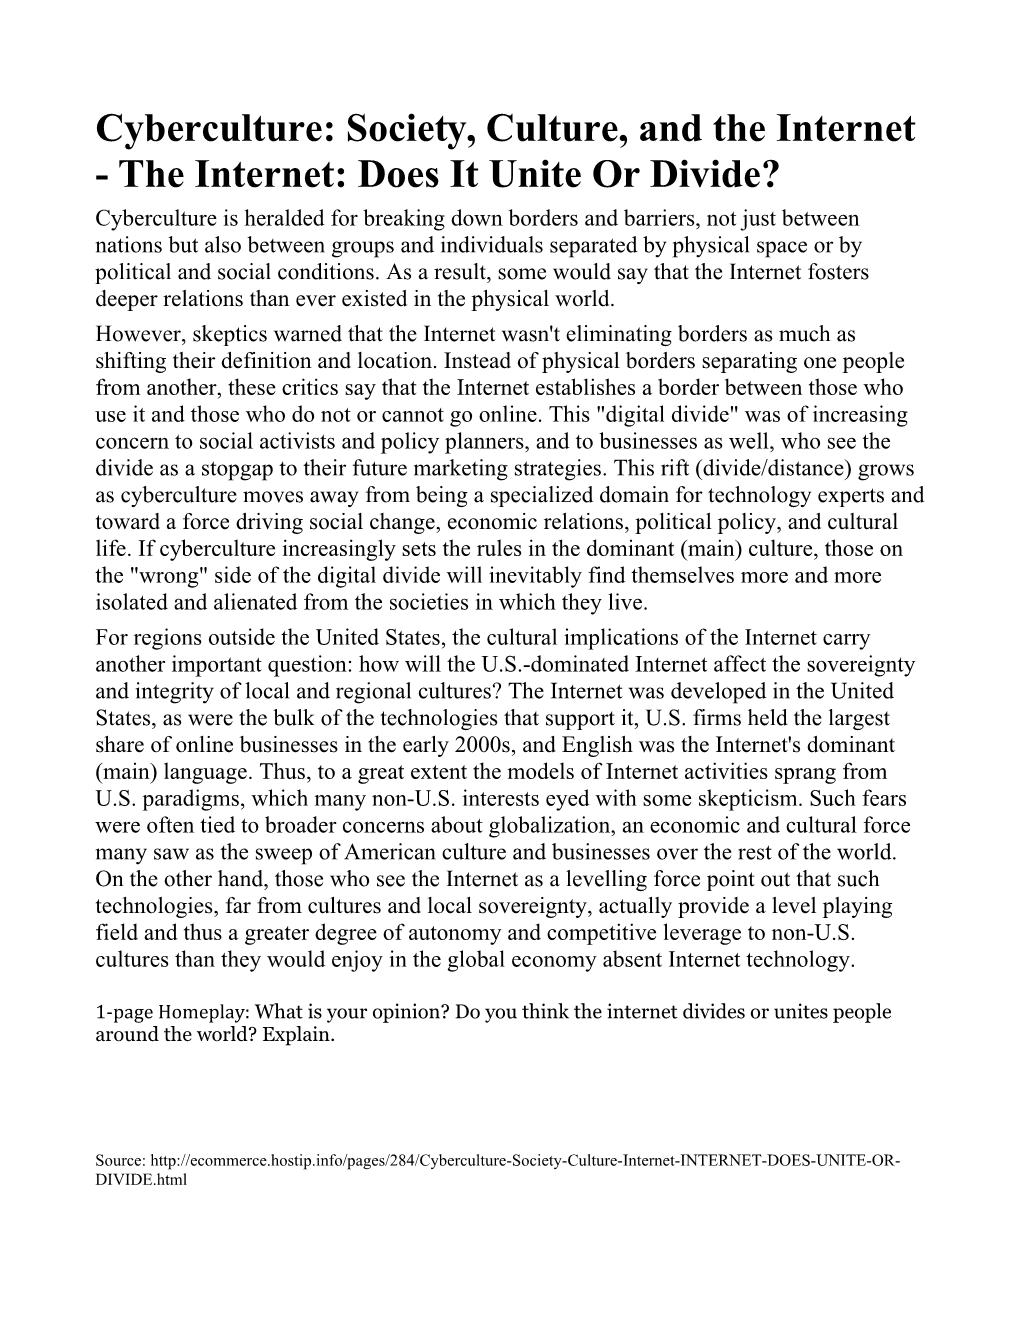 Cyberculture: Society, Culture, and the Internet - the Internet: Does It Unite Or Divide?